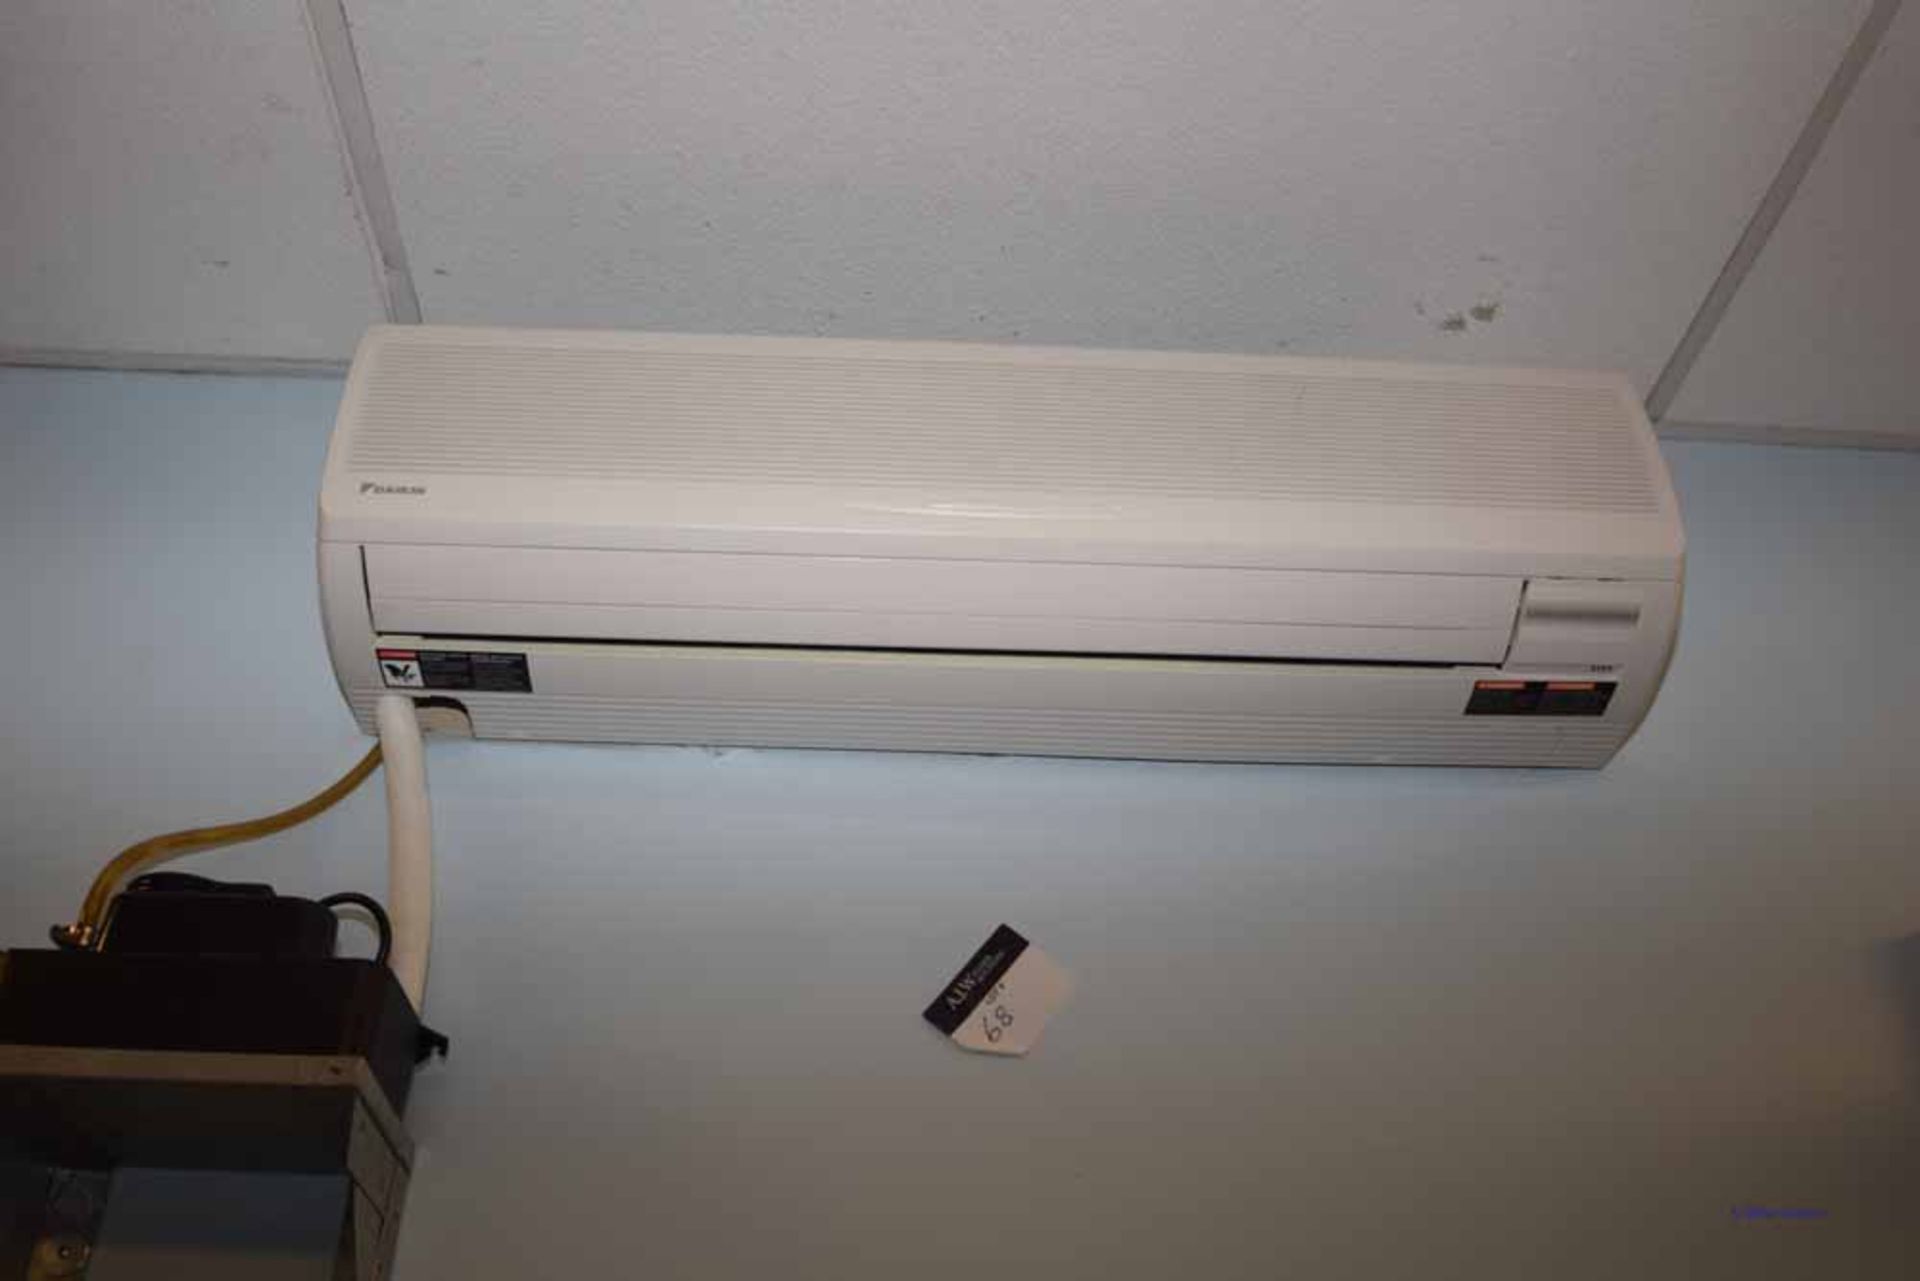 Daikin Wall Mounted Air Unit- no compressor on roof